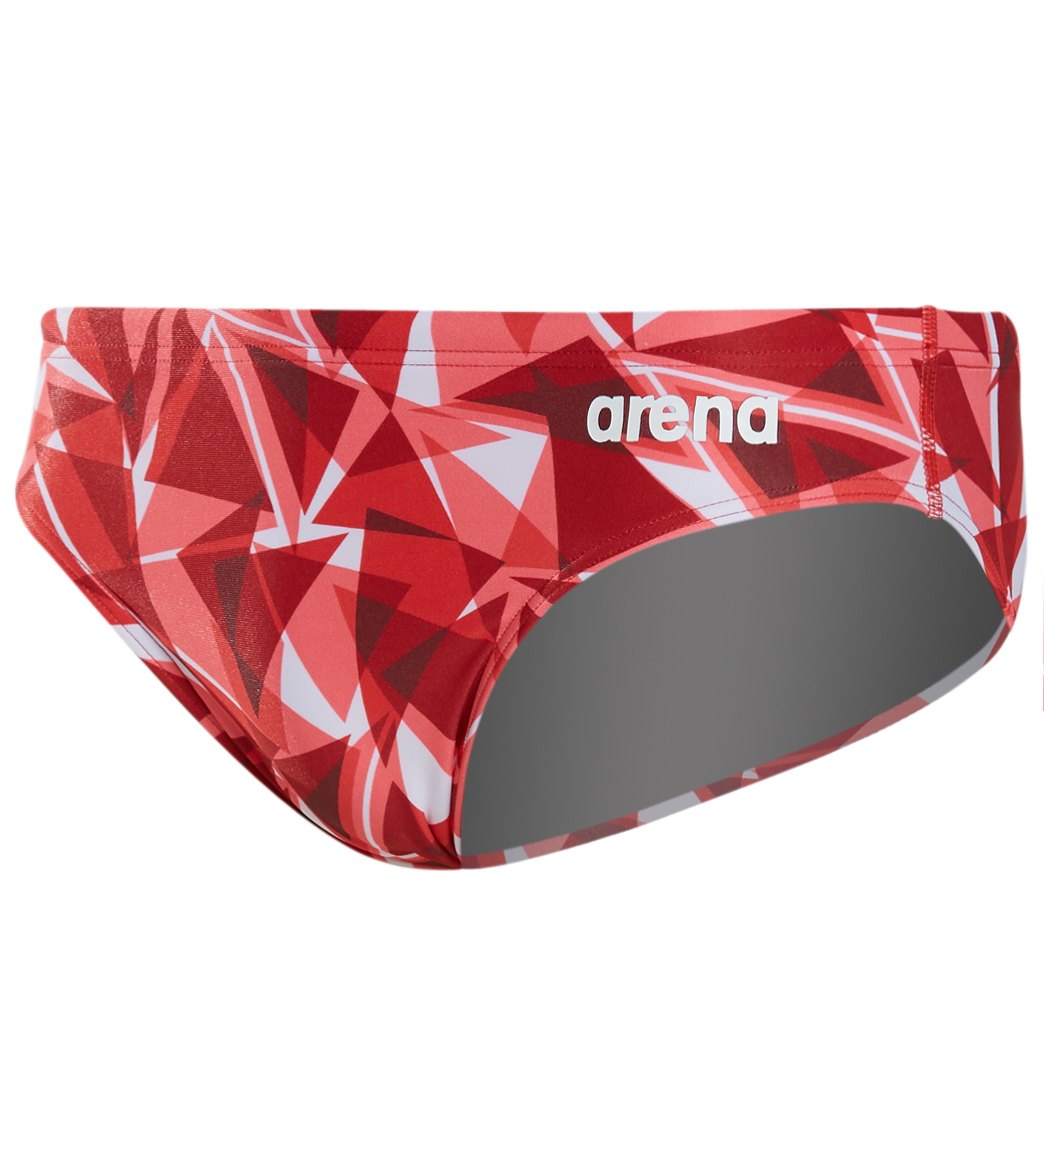 Arena Men's Shattered Glass Maxlife Brief Swimsuit - Fluo Red 38 Polyester - Swimoutlet.com